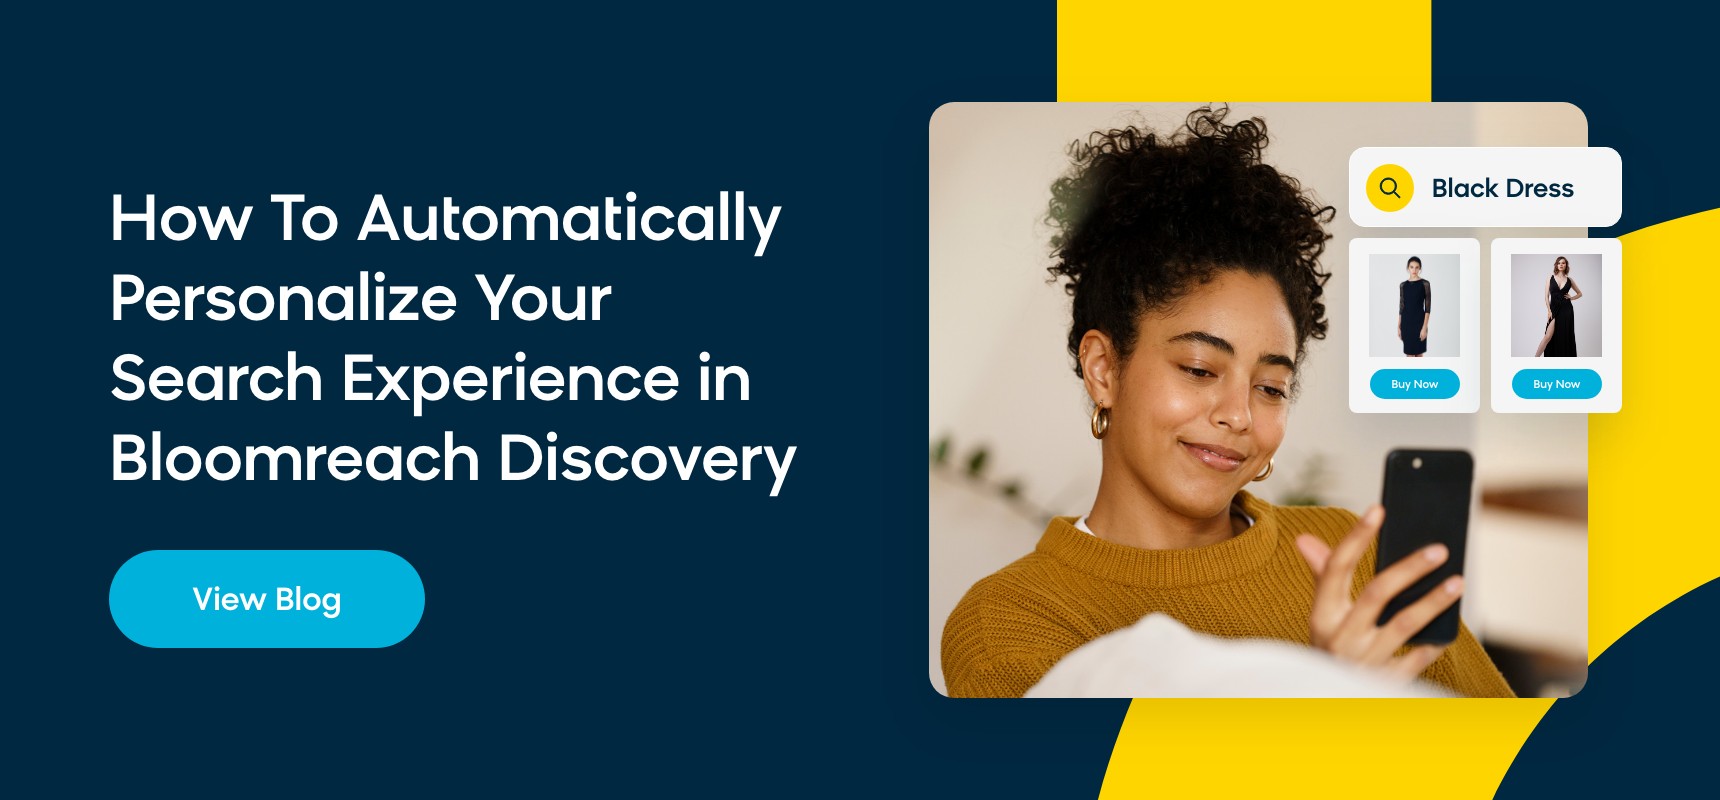 Automatically personalize your search experience in Bloomreach Discovery